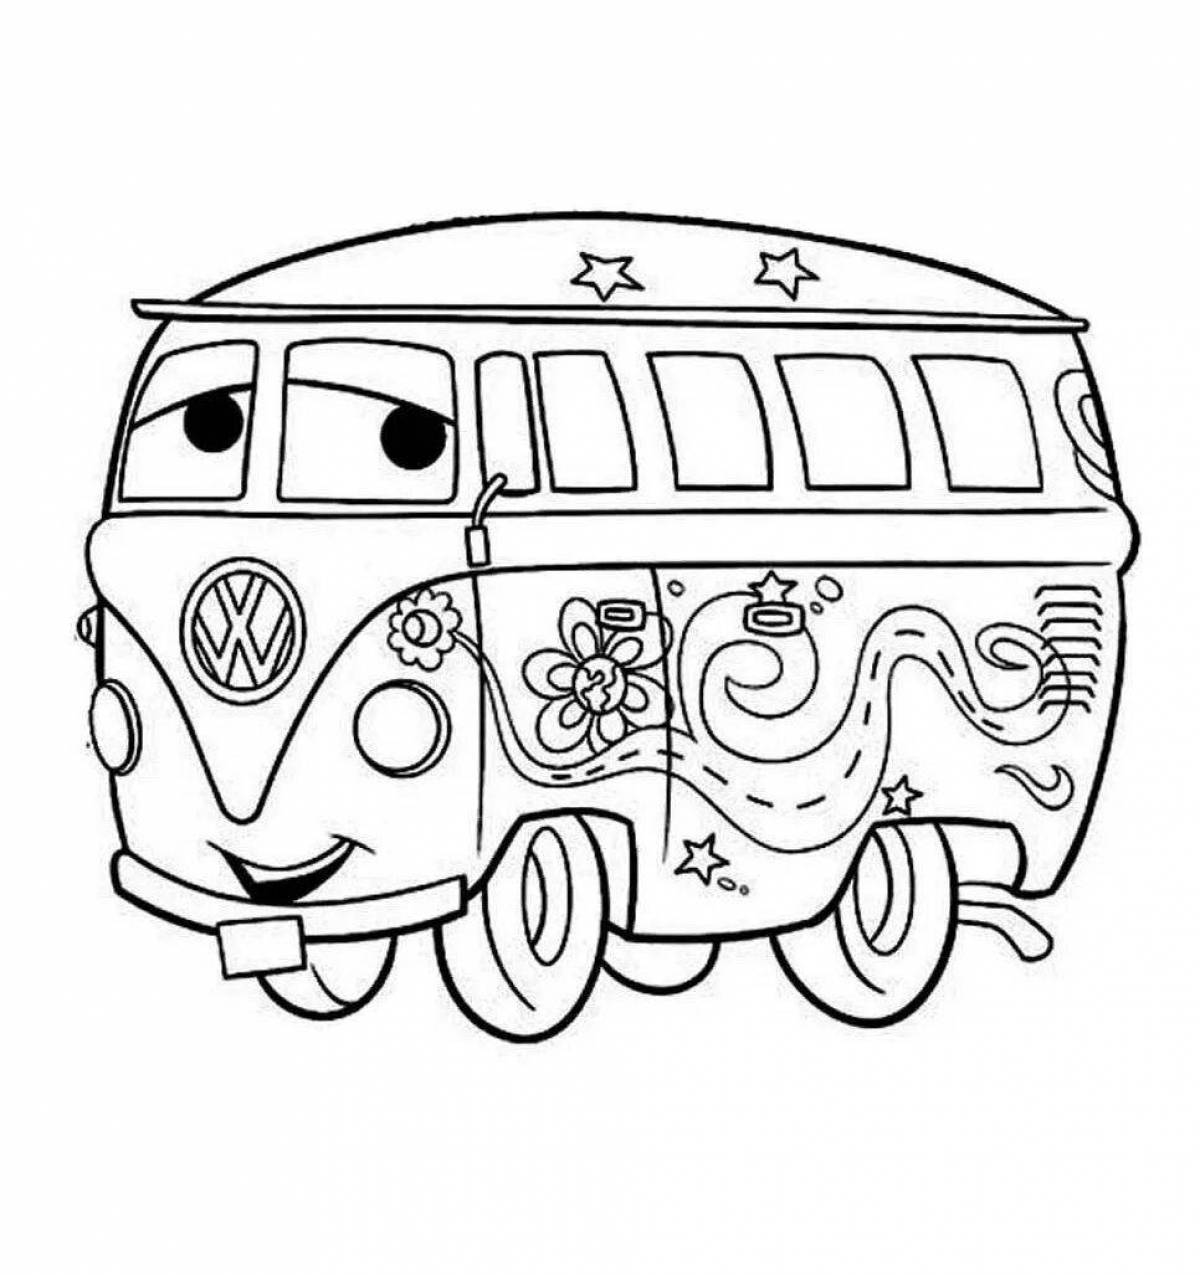 Coloring page amazing cars and buses